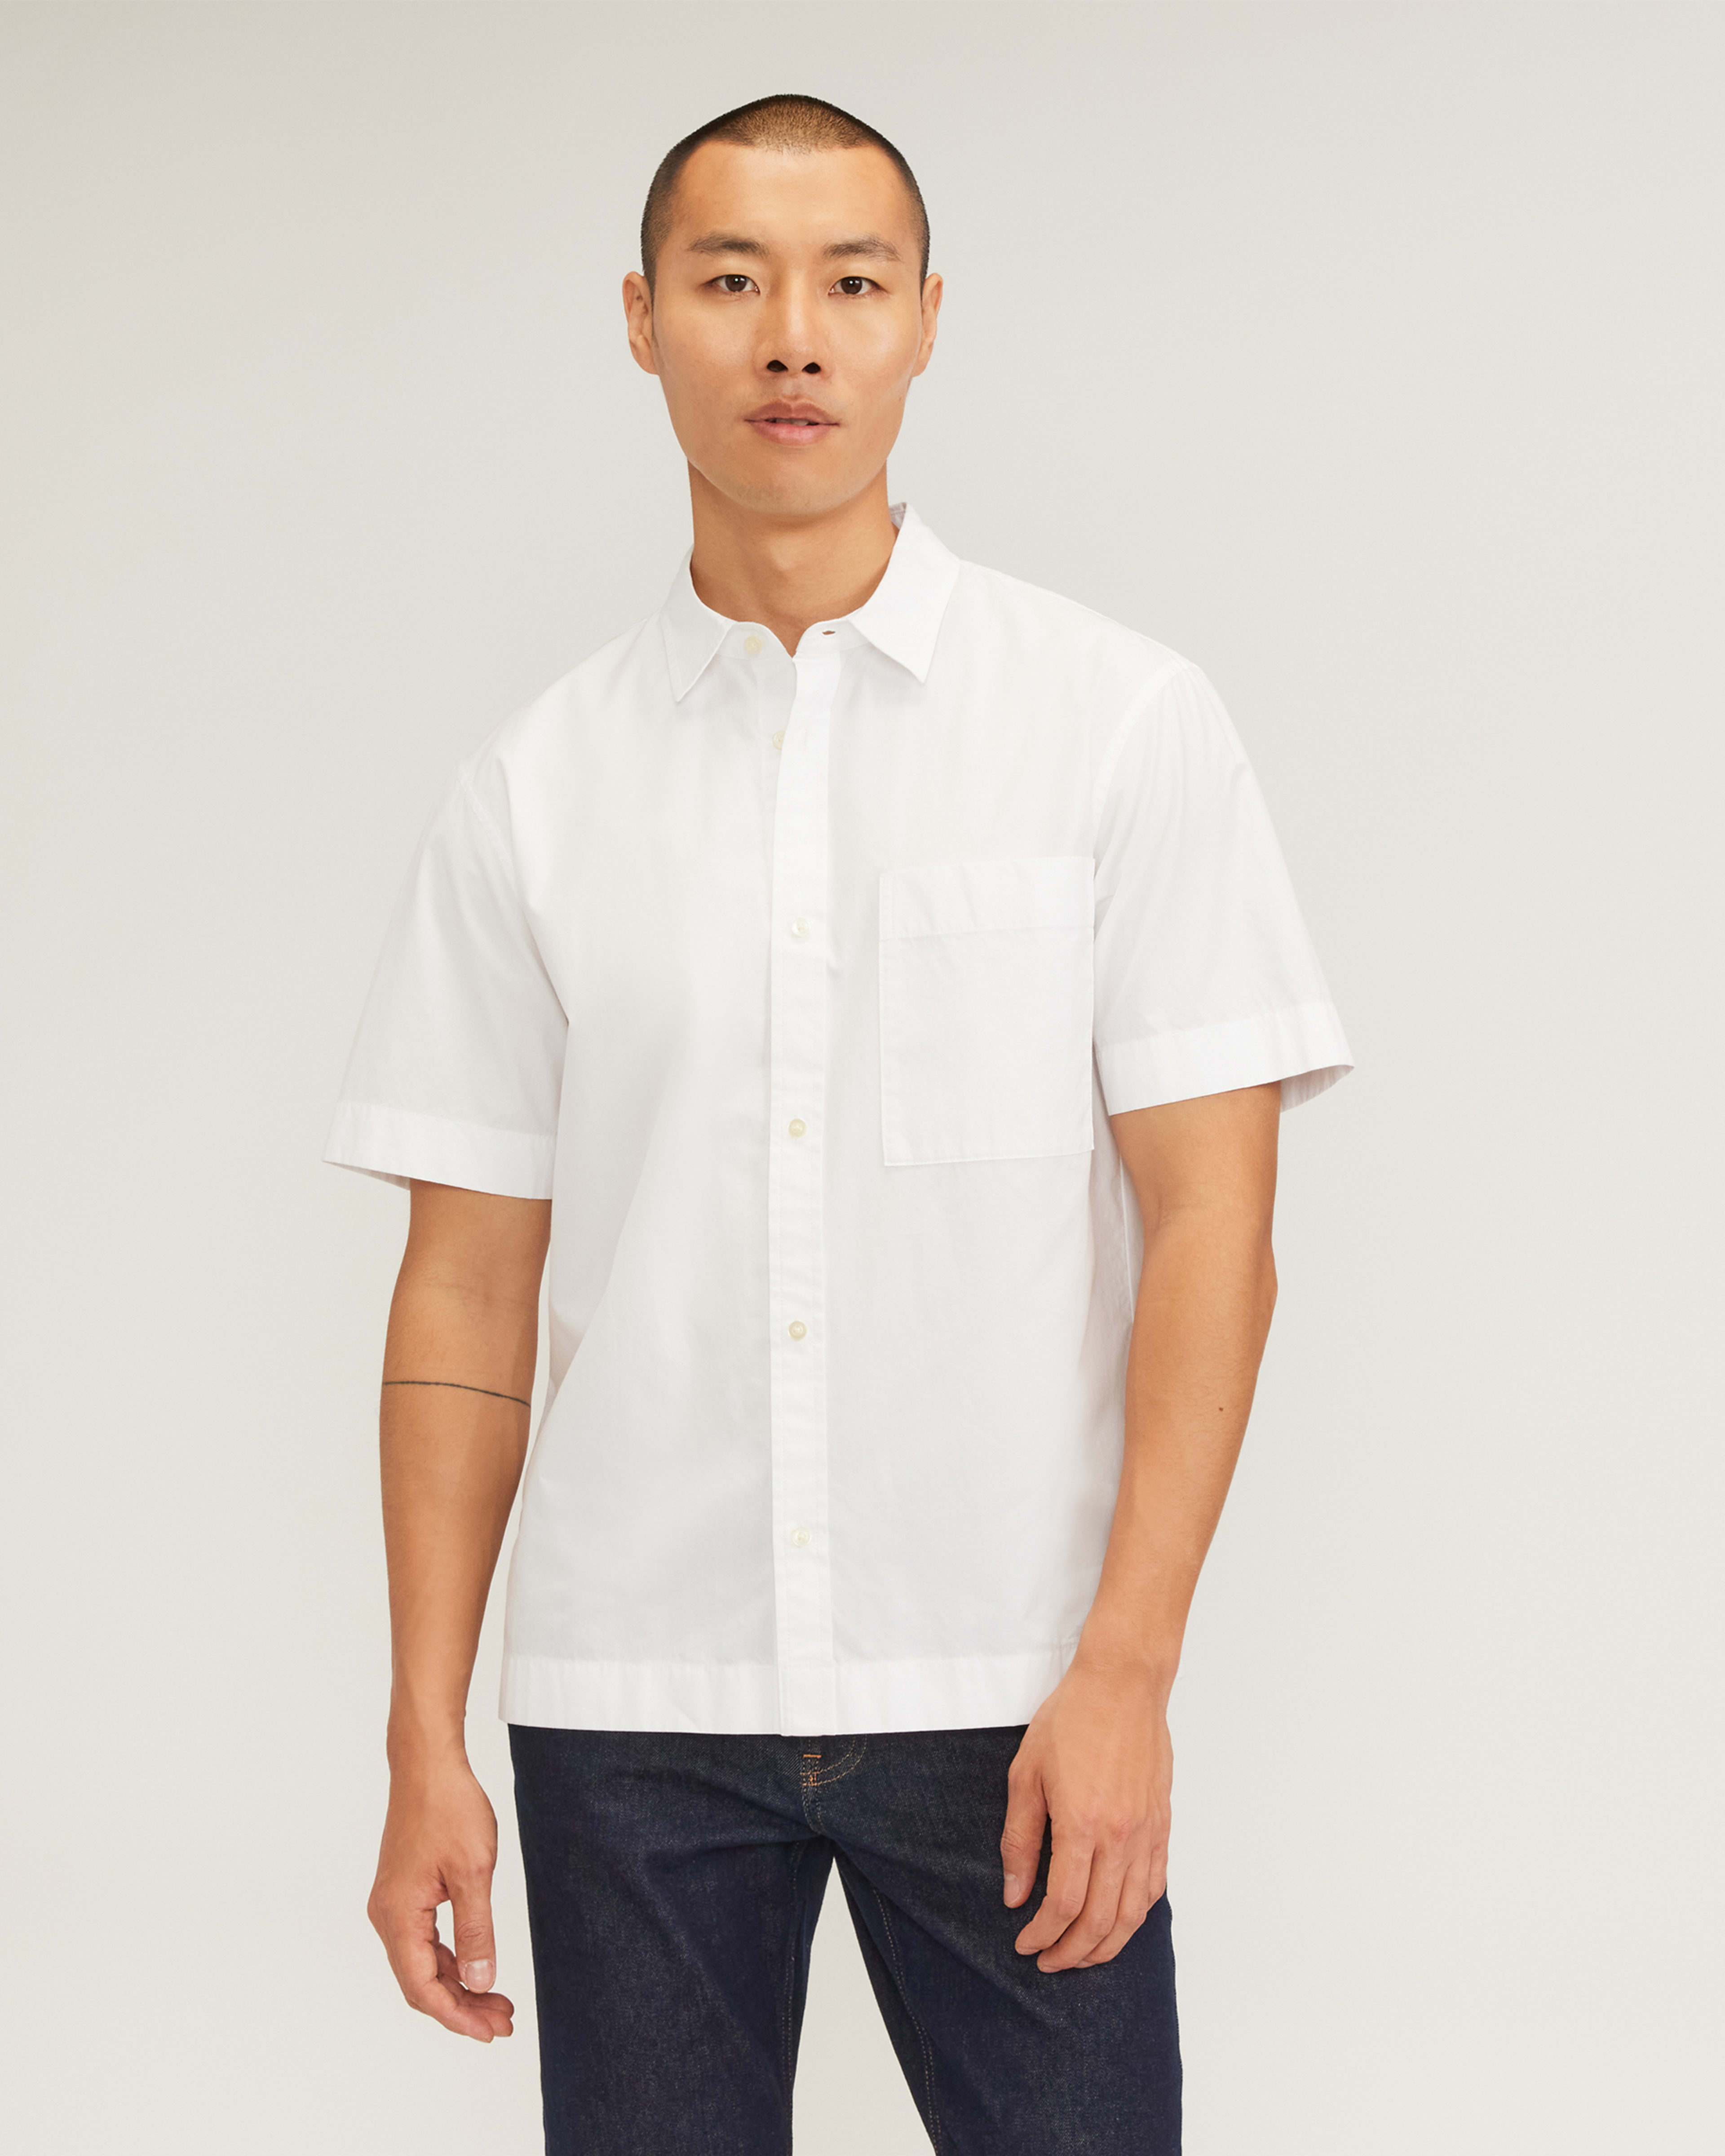 New in from Everlane, July and August 2022: The Poplin Short